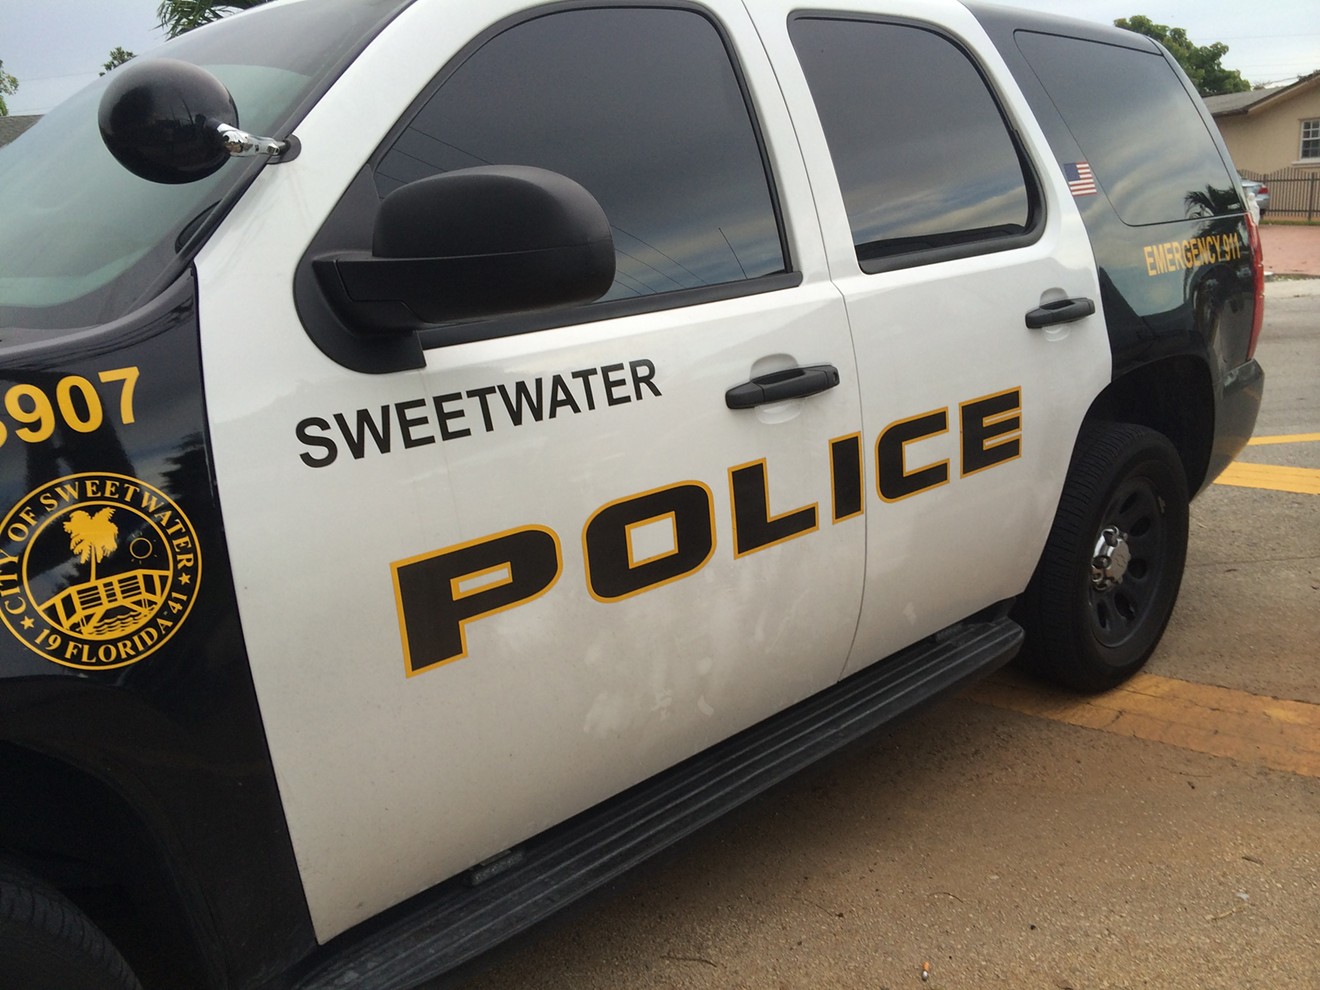 Sweetwater Police Lt. Christian Boada has appealed his termination.